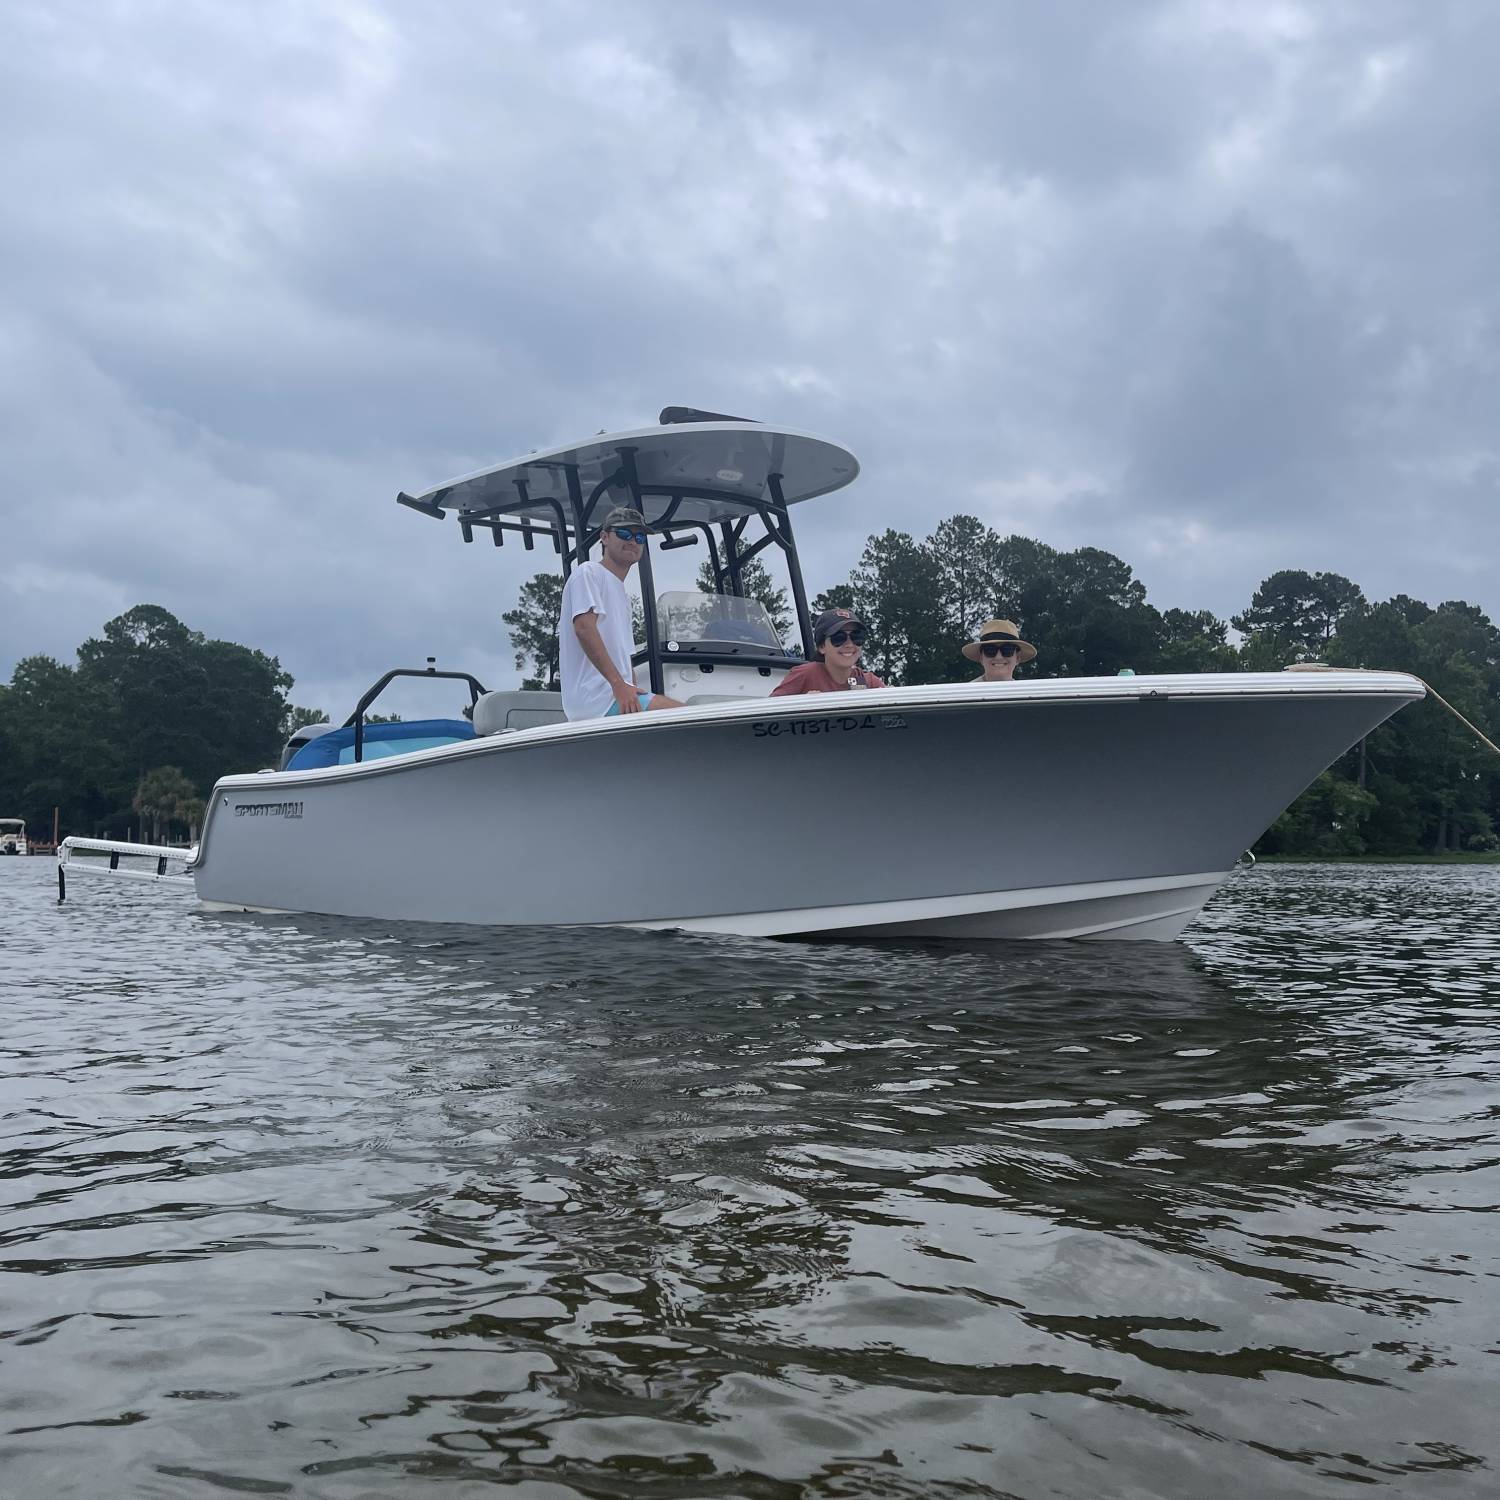 Title: Family time on the Sandbar - On board their Sportsman Heritage 231 Center Console - Location: Wyboo Sandbar (Manning, Sc). Participating in the Photo Contest #SportsmanJune